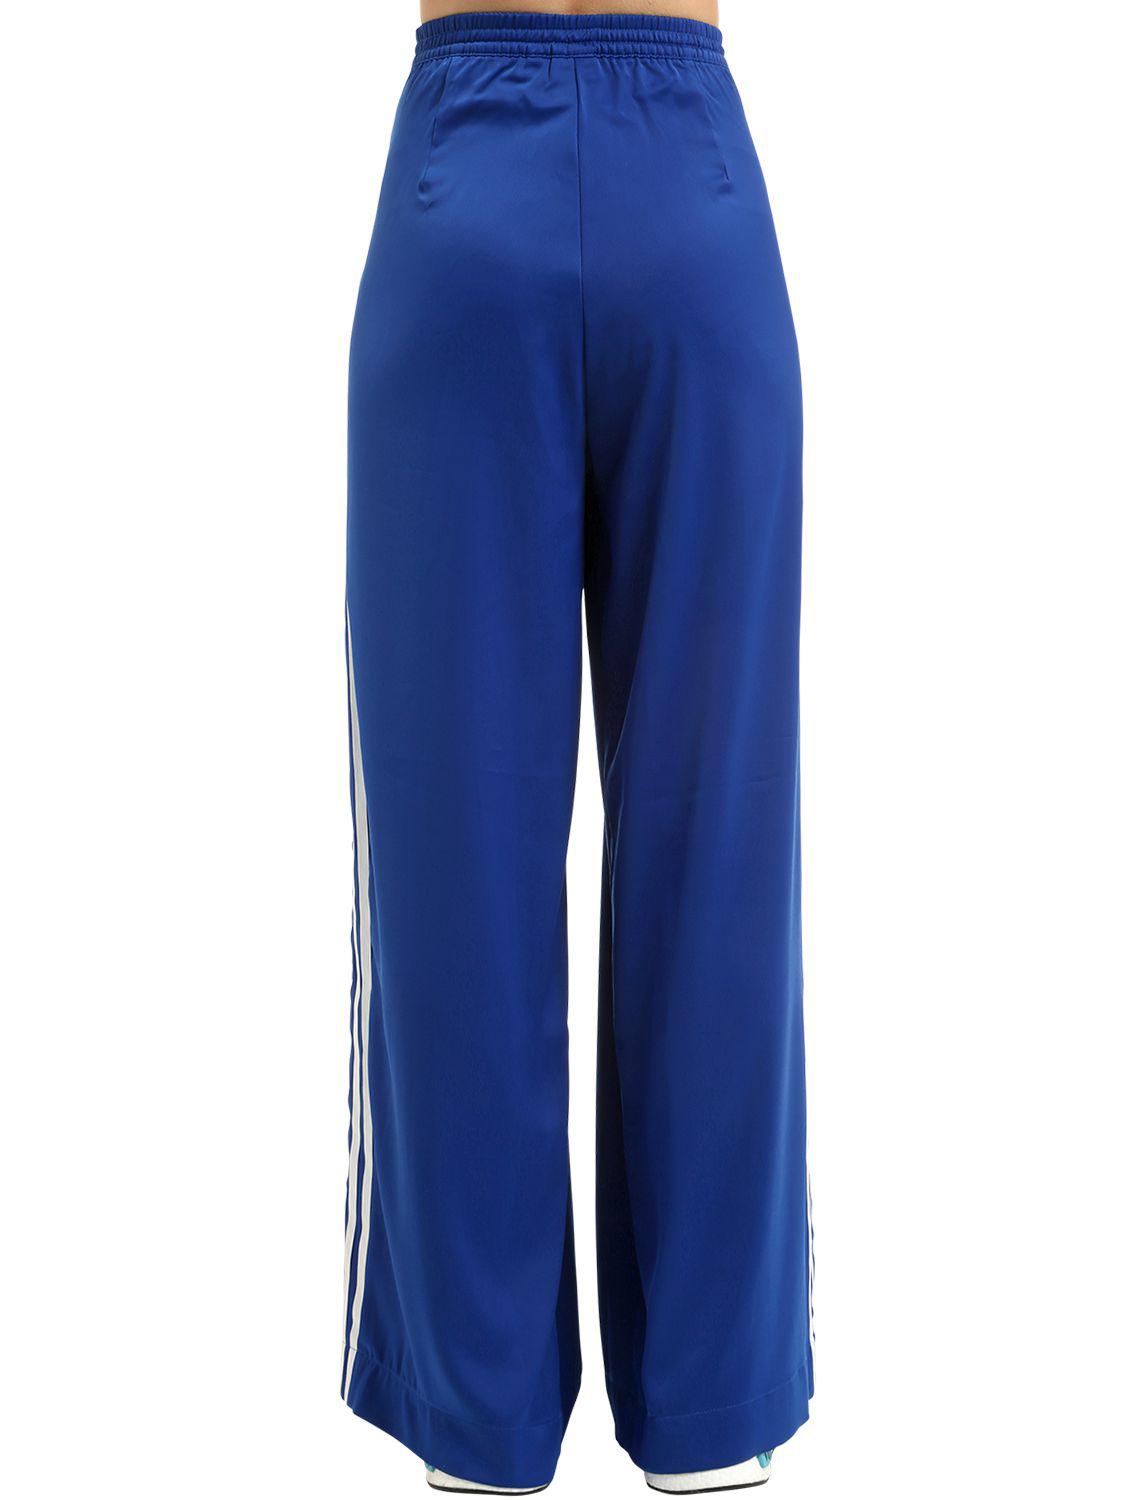 adidas Originals Fashion League Pleated Satin Track Pants in Blue - Lyst